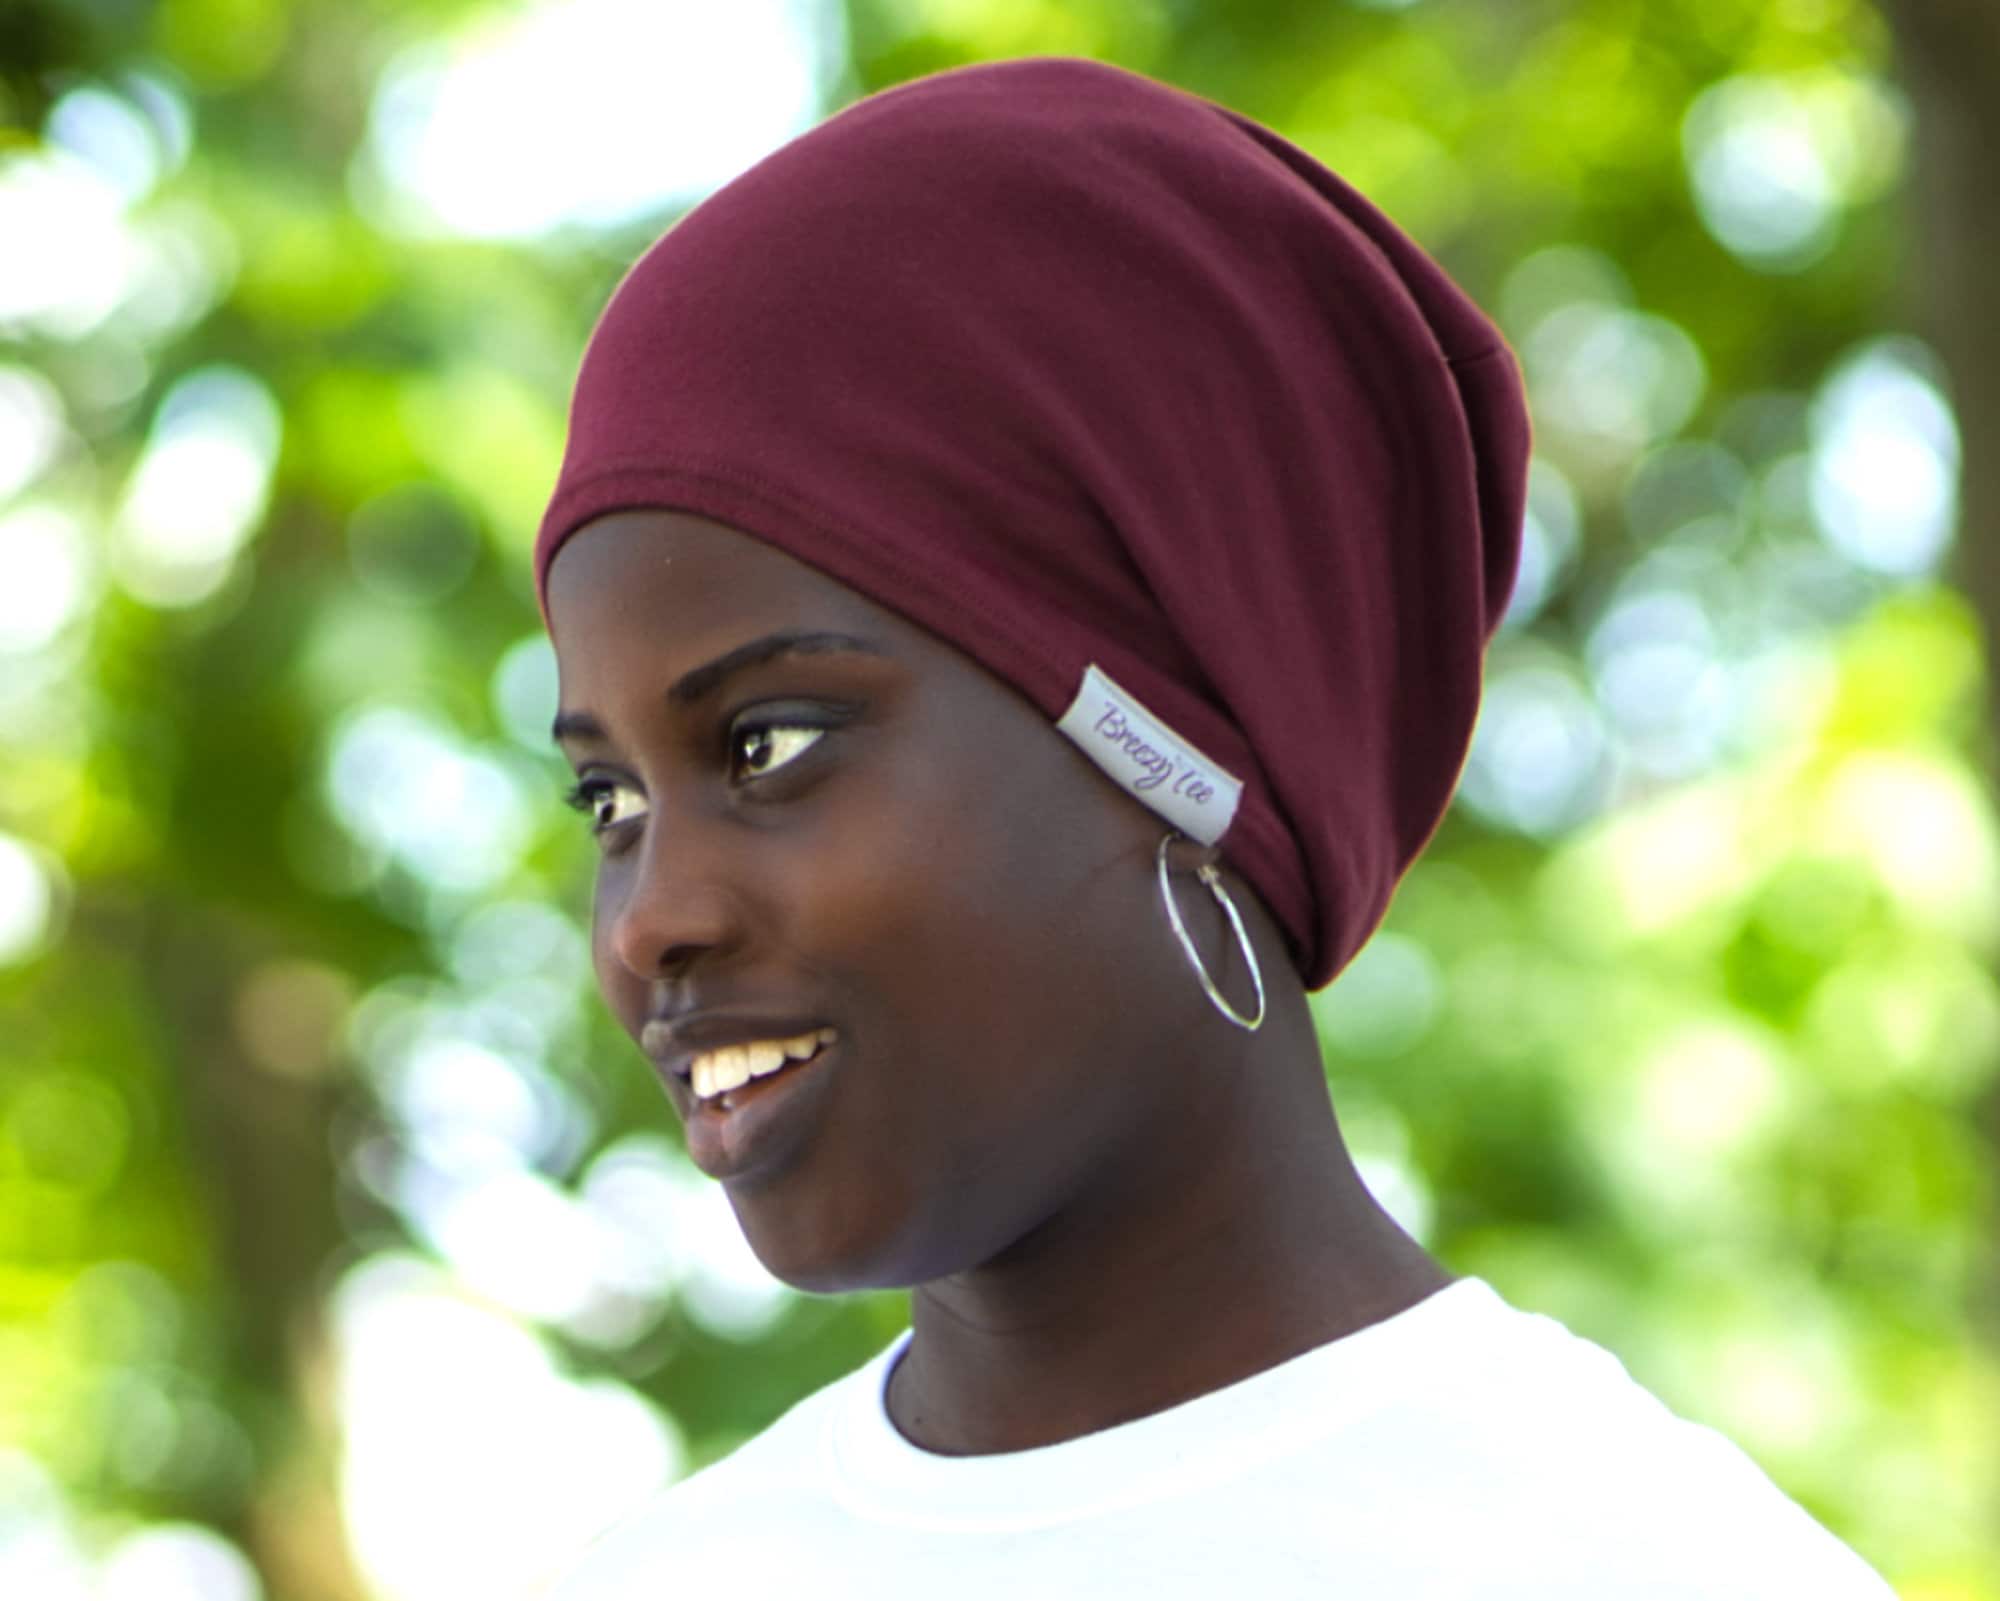 Red Burgundy Satin-Lined Beanie for Women and Men - Soft and Warm